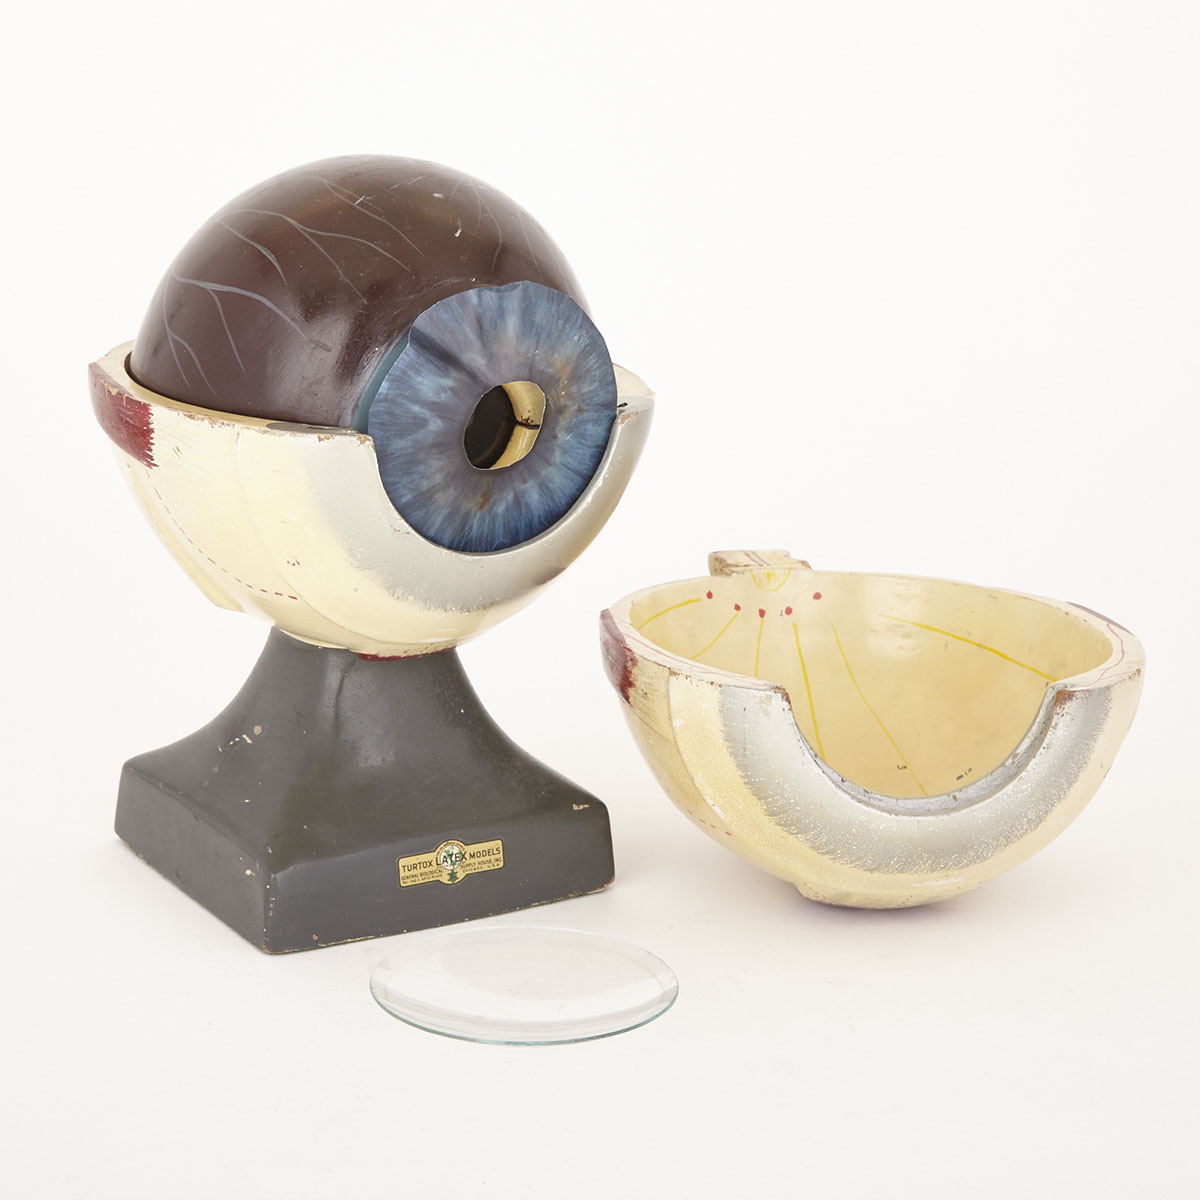 Anatomical Study Model of an Eye by Turtox Latex Models, mid 20th century